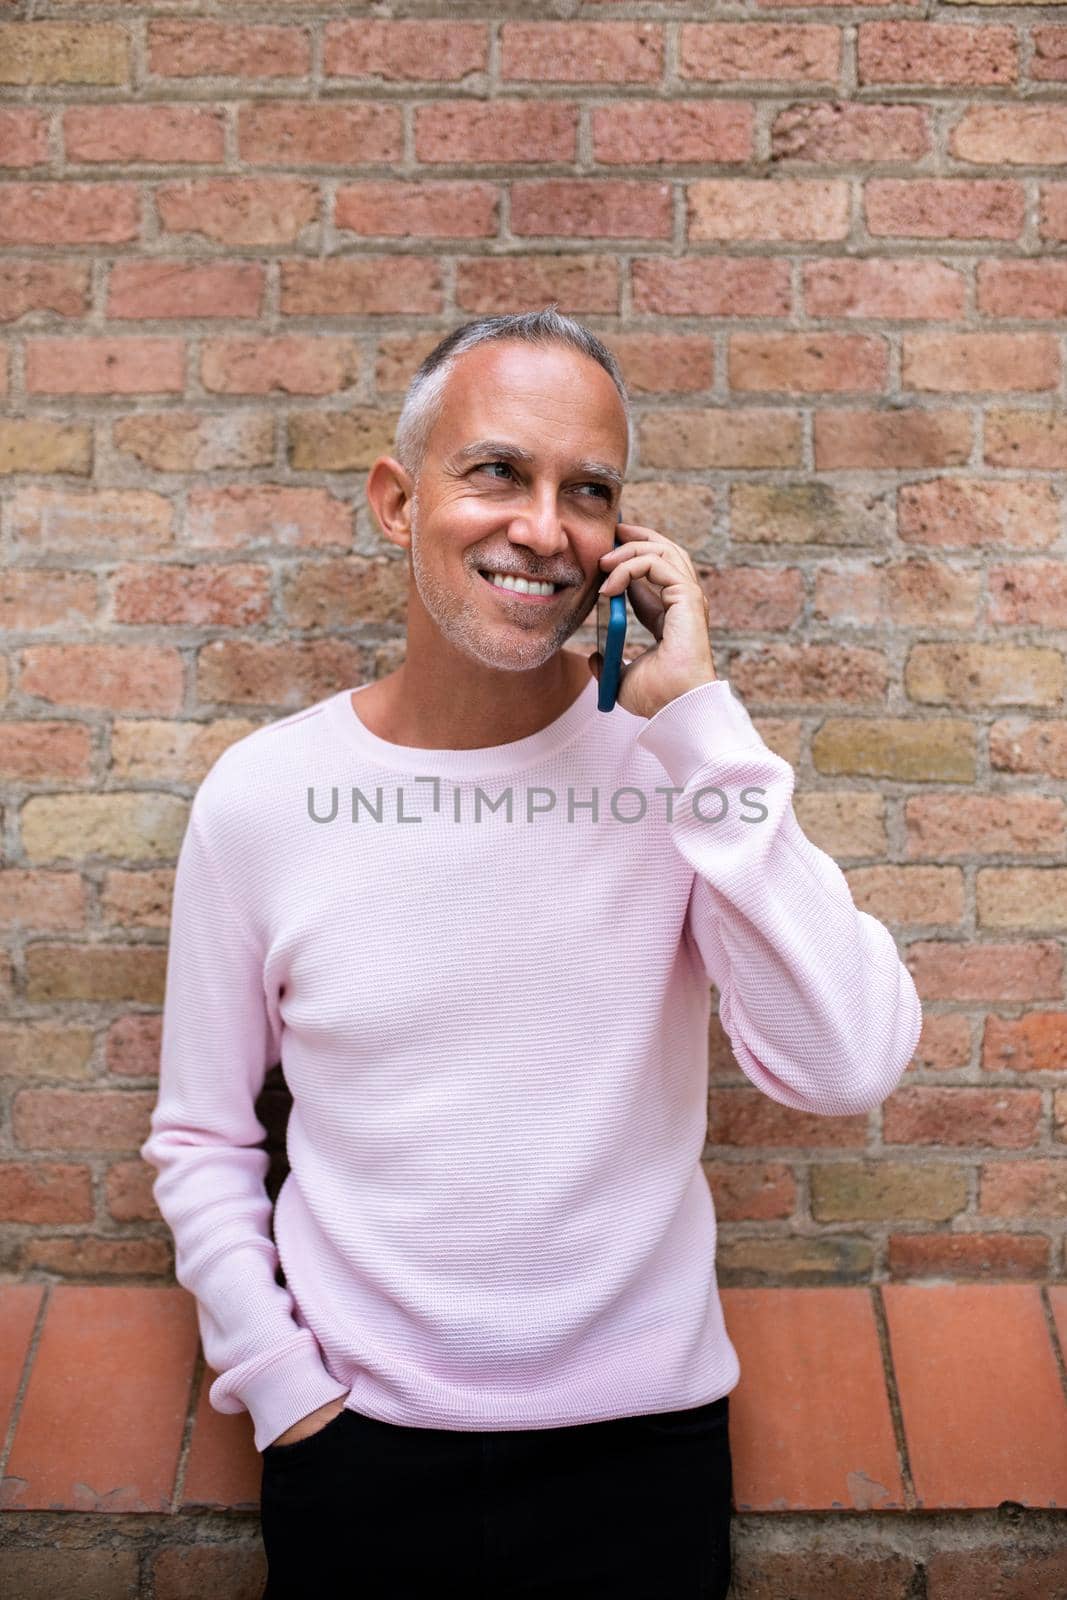 Smiling caucasian man talking with mobile phone leaning against orange brick wall. Vertical image. Lifestyle and technology concept.